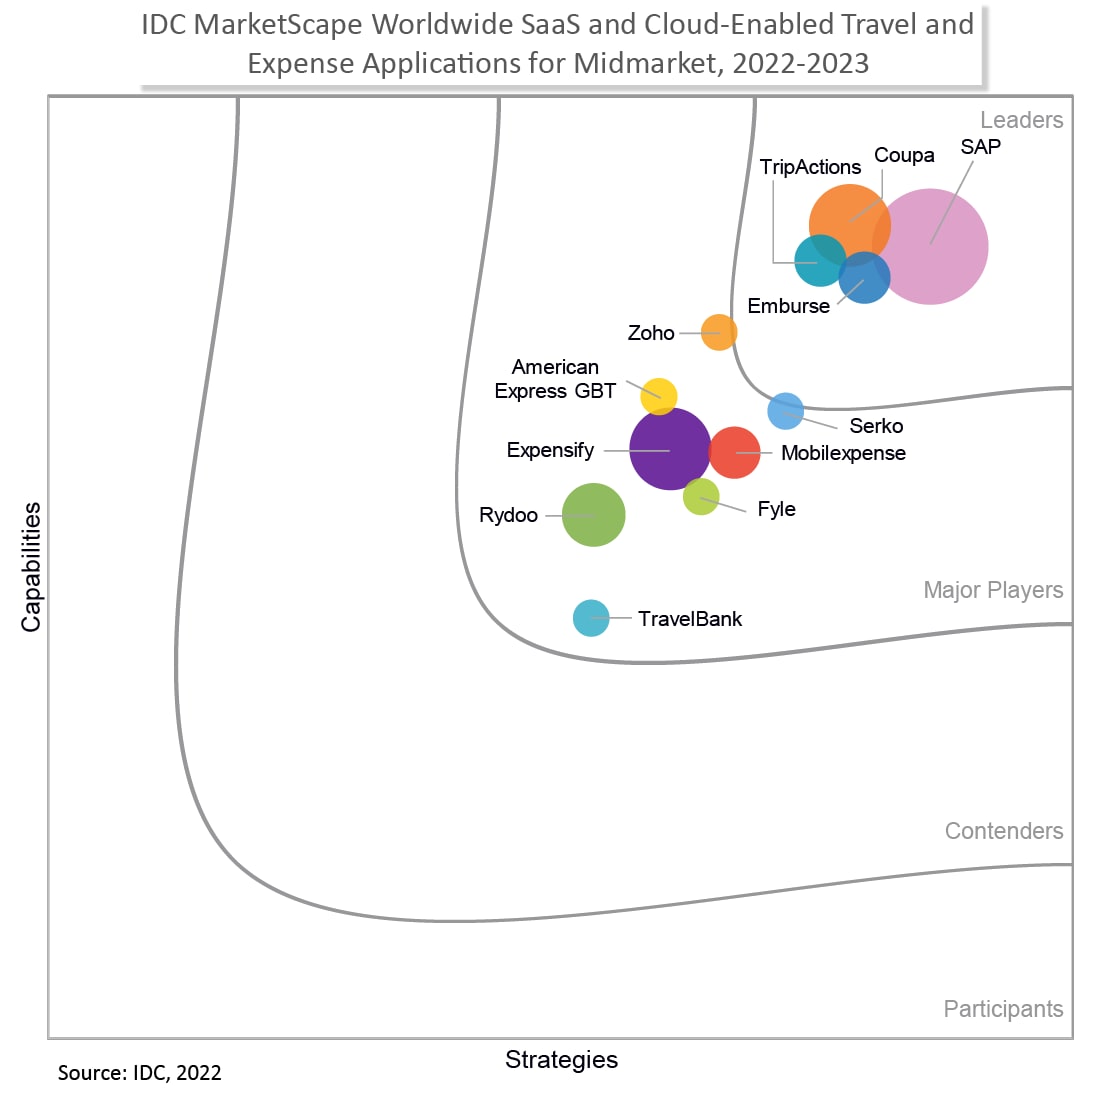 IDC MarketScape Worldwide SaaS and Cloud-Enabled Travel and Expense Applications for Midmarket 2022-2023 Vendor Assessment